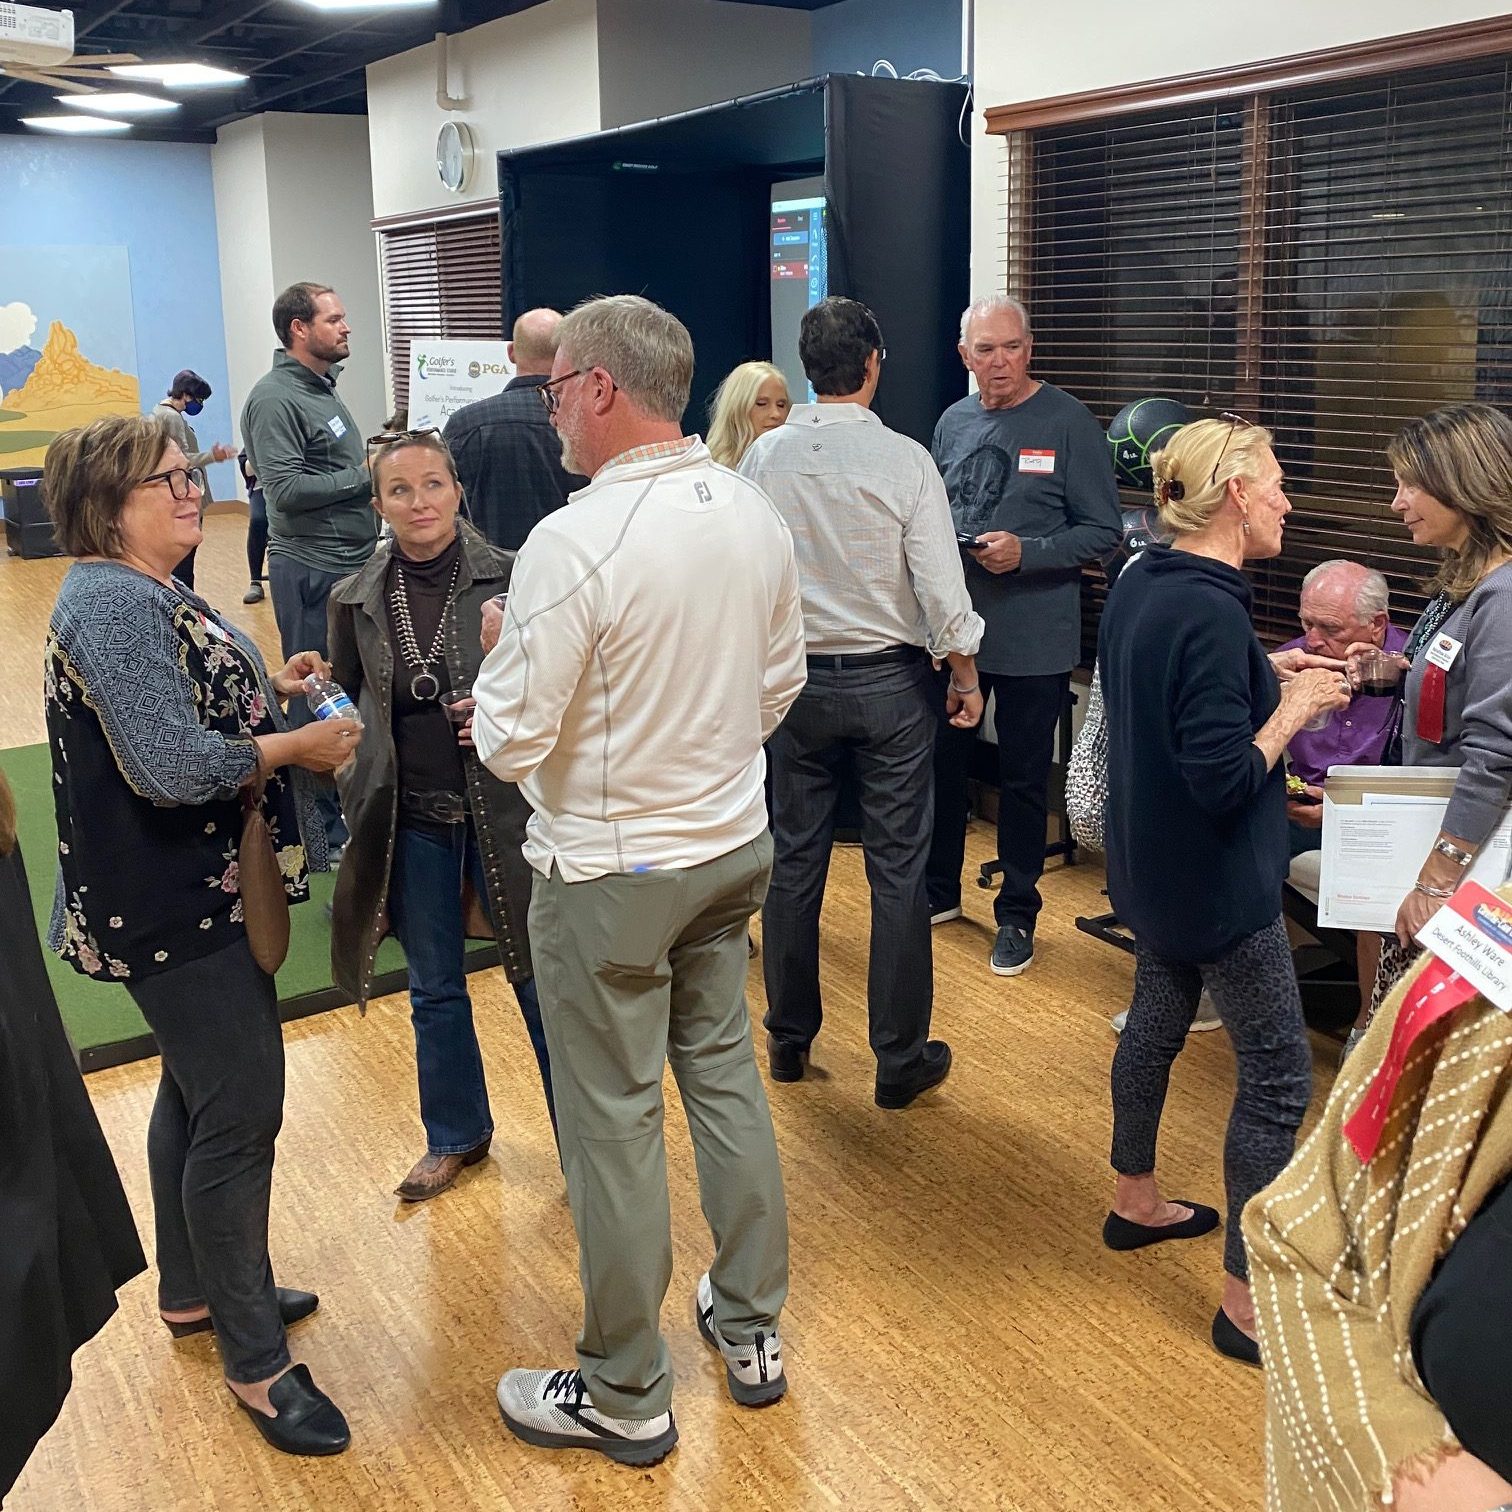 carefree cave creek chamber of commerce evening mixer at golfers performance studio